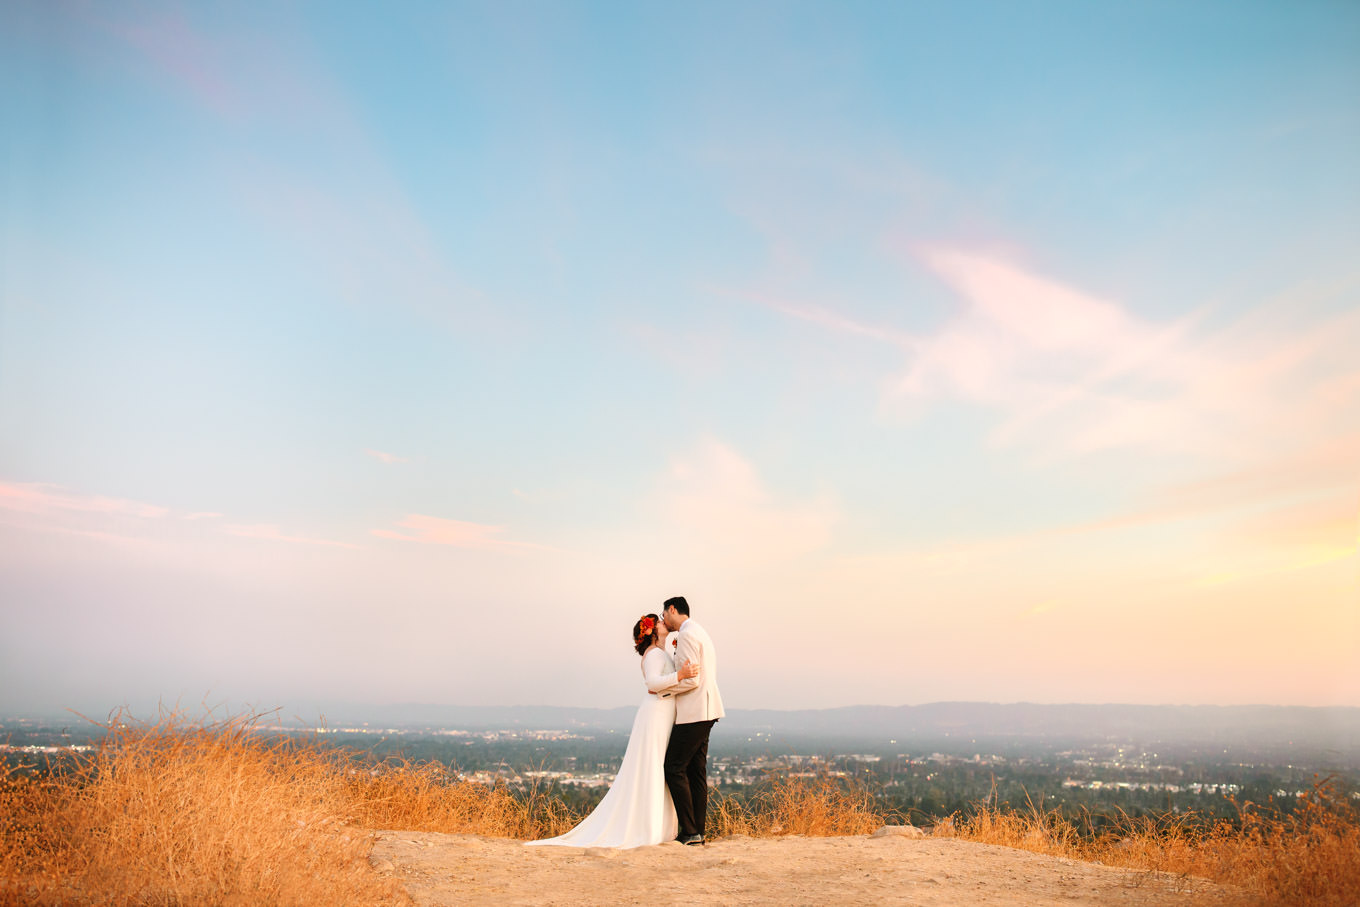 Bride and groom share a kiss with cityscape as backdrop | Vibrant backyard micro wedding featured on Green Wedding Shoes | Colorful LA wedding photography | #losangeleswedding #backyardwedding #microwedding #laweddingphotographer Source: Mary Costa Photography | Los Angeles